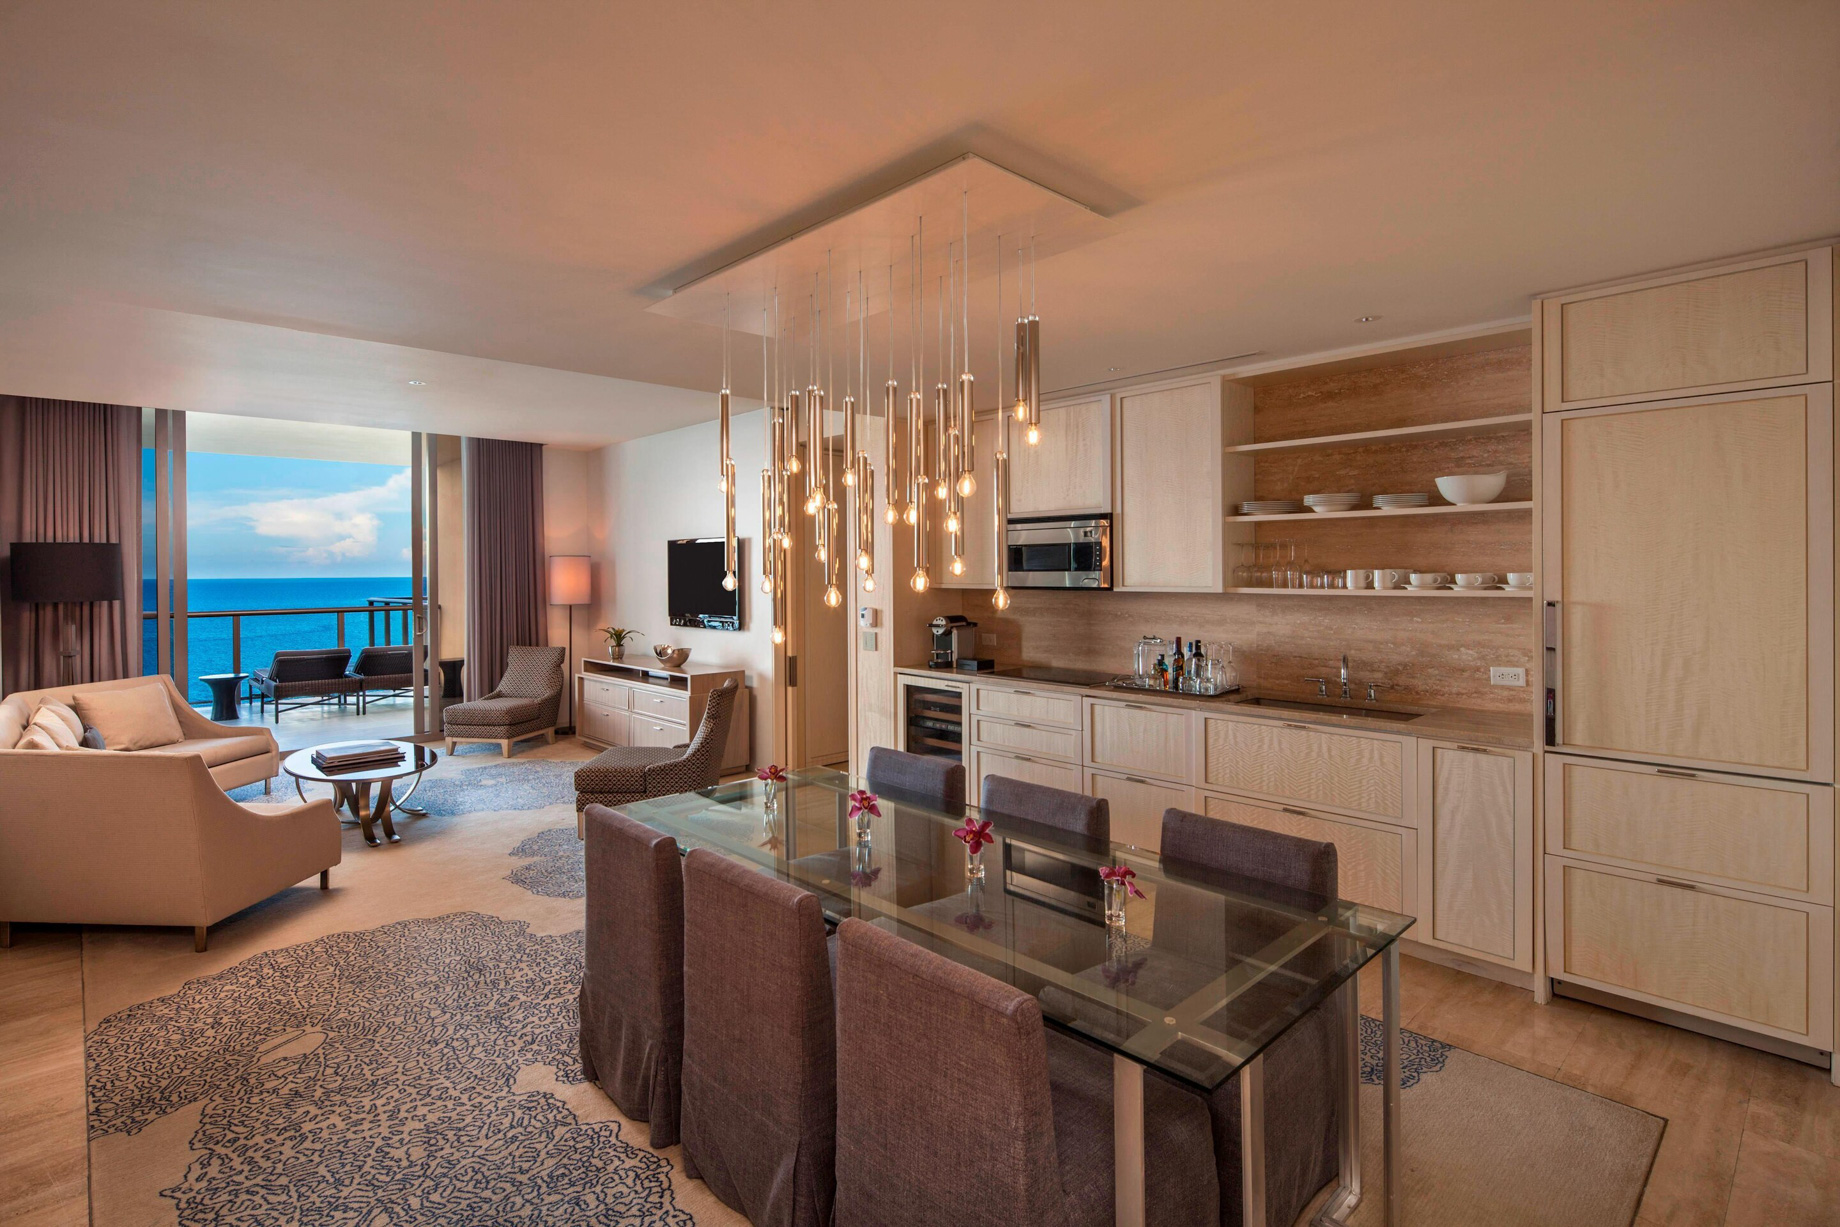 The St. Regis Bal Harbour Resort – Miami Beach, FL, USA – Royal Oceanfront Suite Kitchen and Dining Area